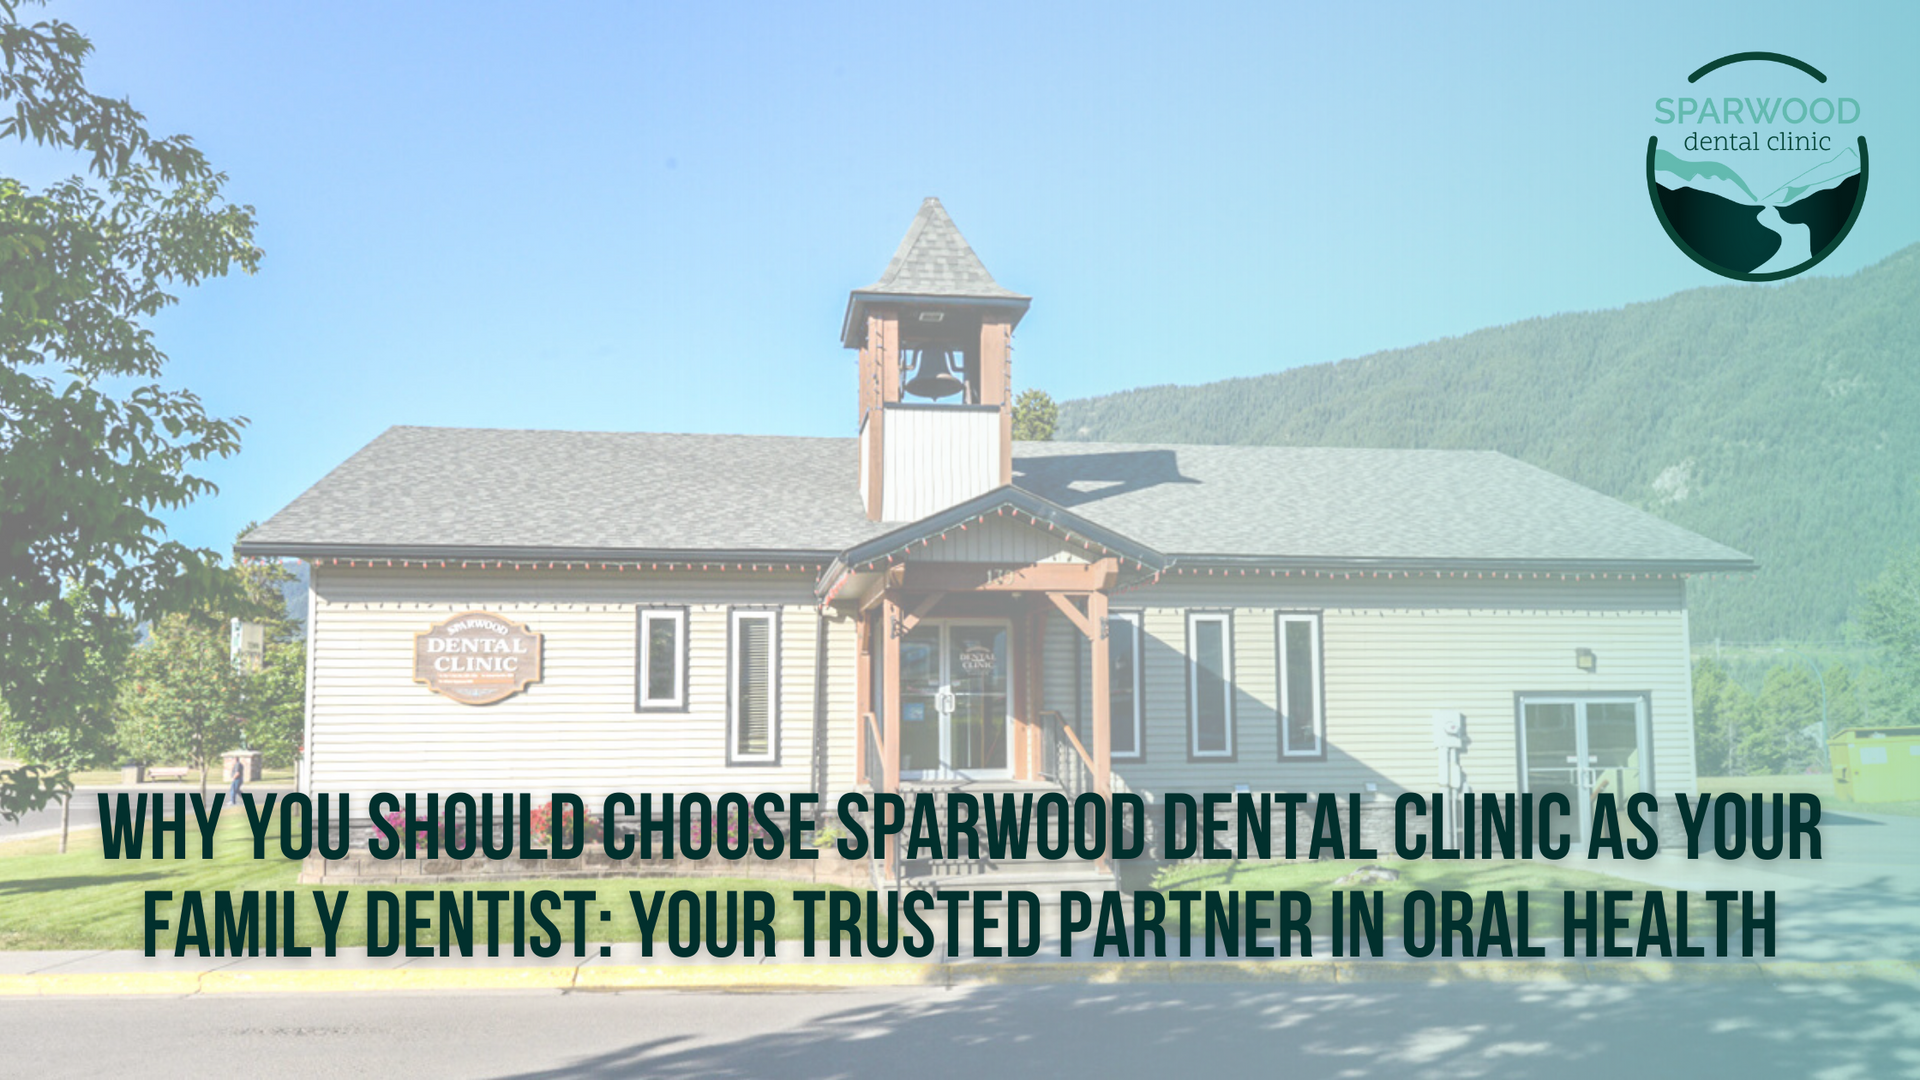 Sparwood Dental Clinic office with title